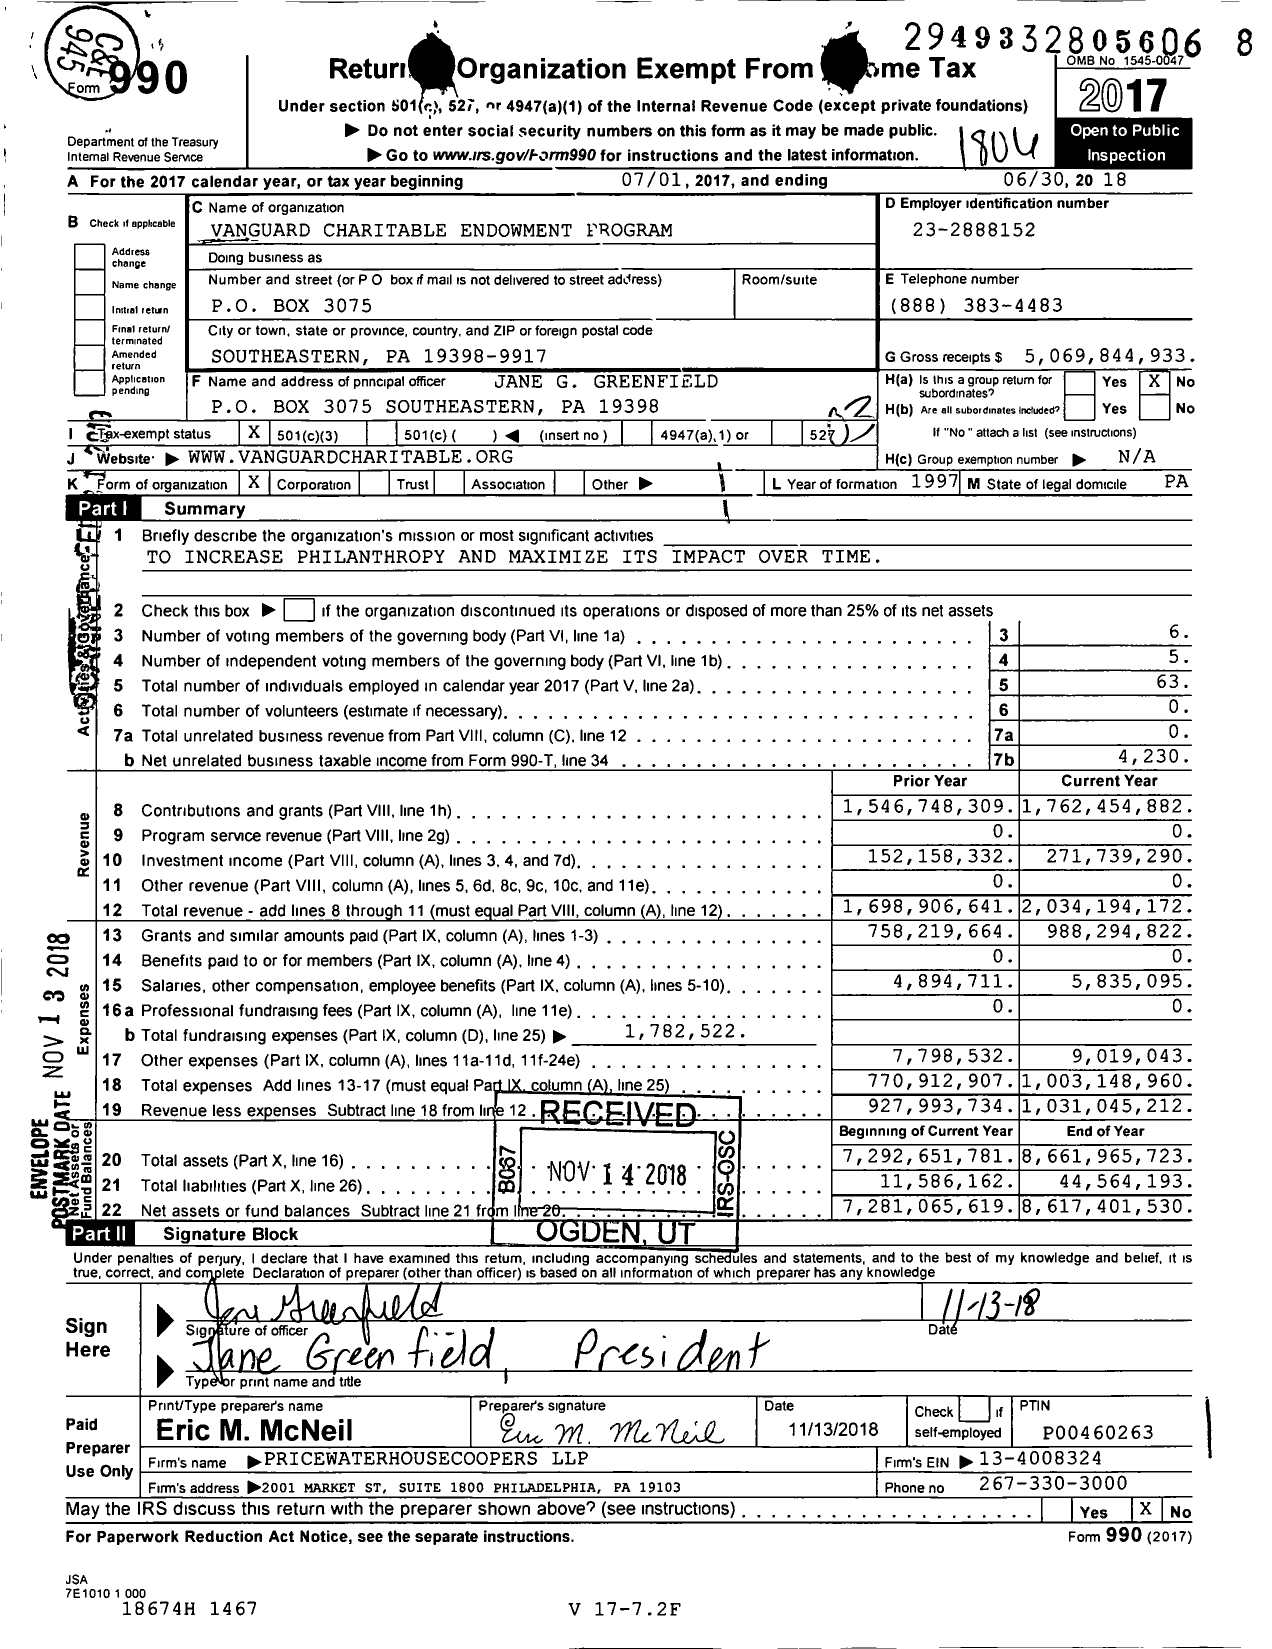 Image of first page of 2017 Form 990 for Vanguard Charitable Endowment Program